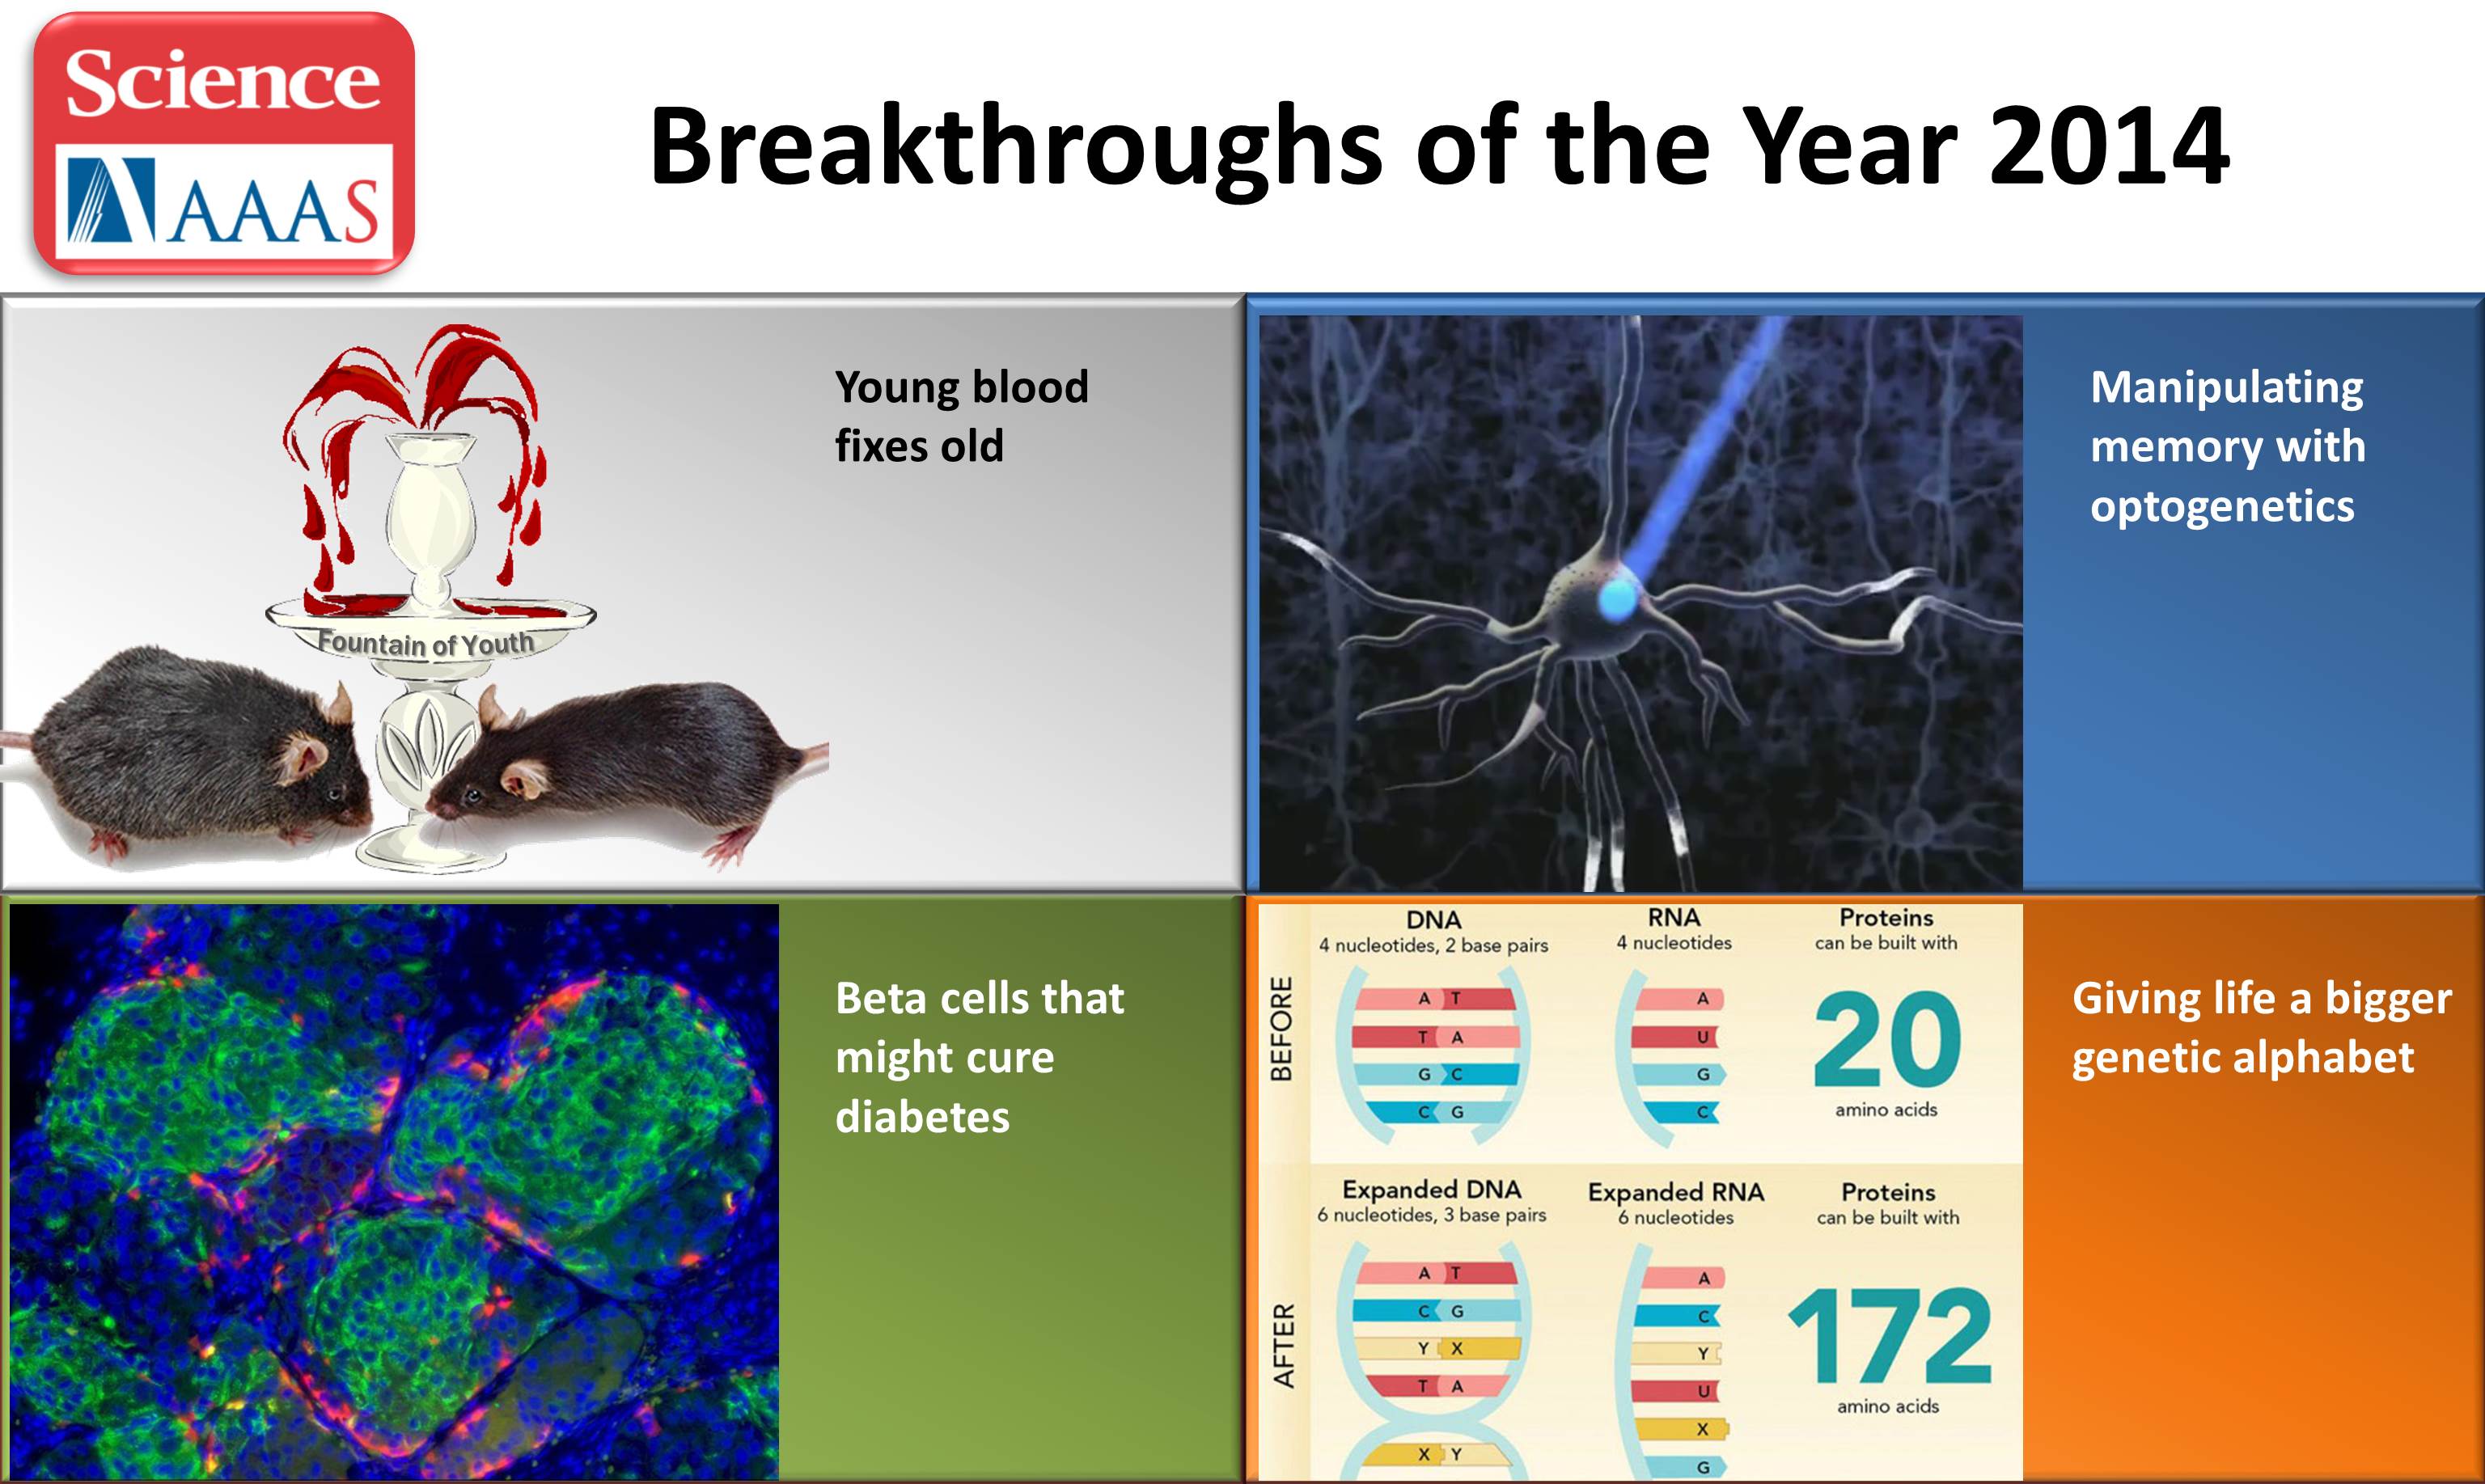 NIH-funded AAAS/Science Editors' Choice for 2014 Breakthroughs of the Year